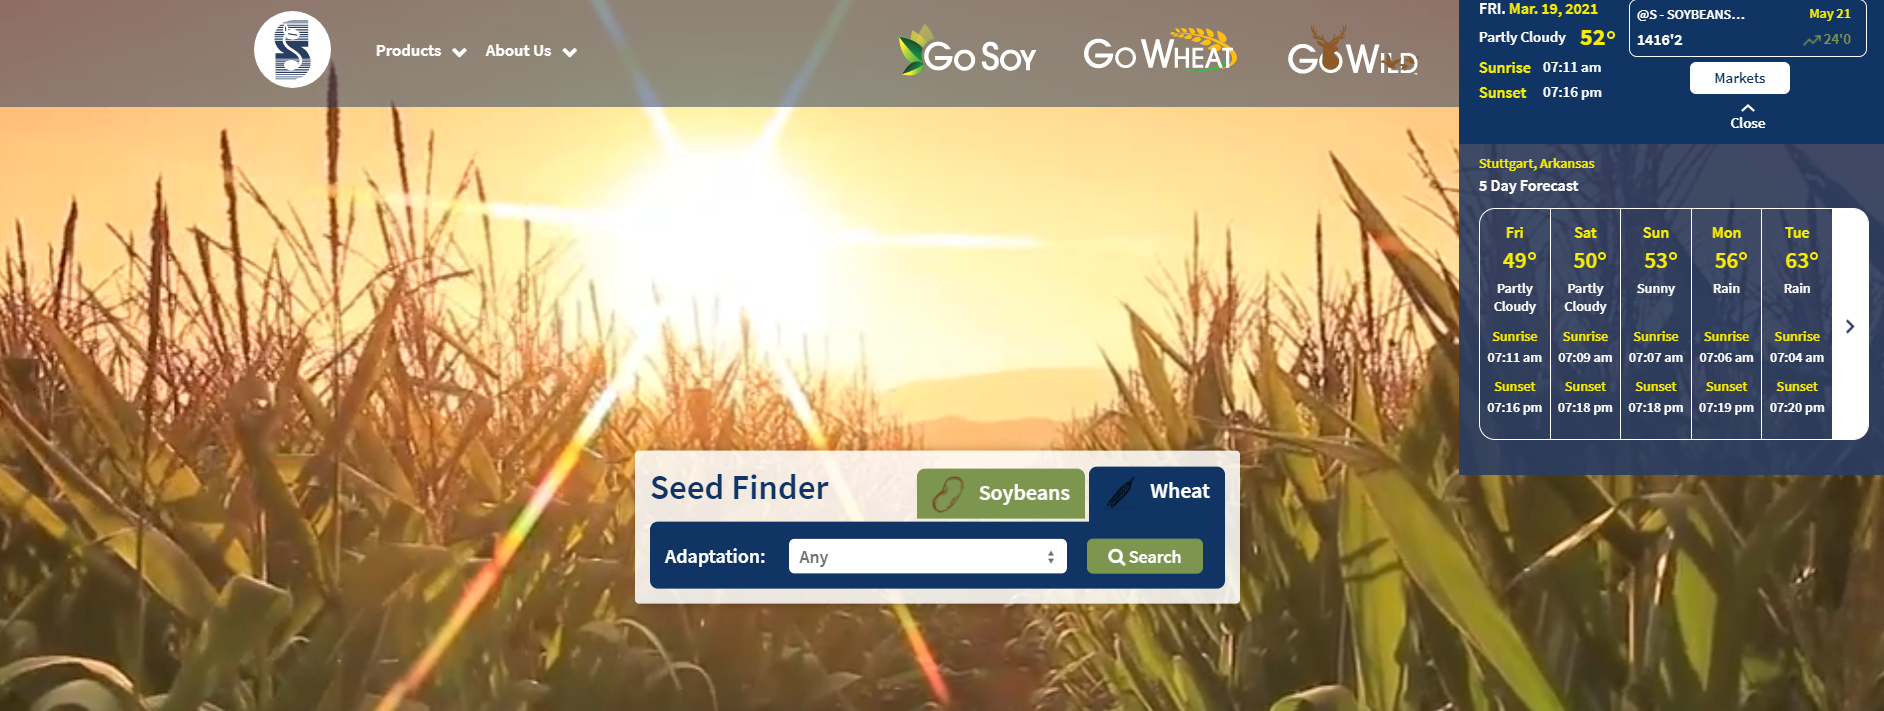 Seed finder and DTN module on Stratton Seed website